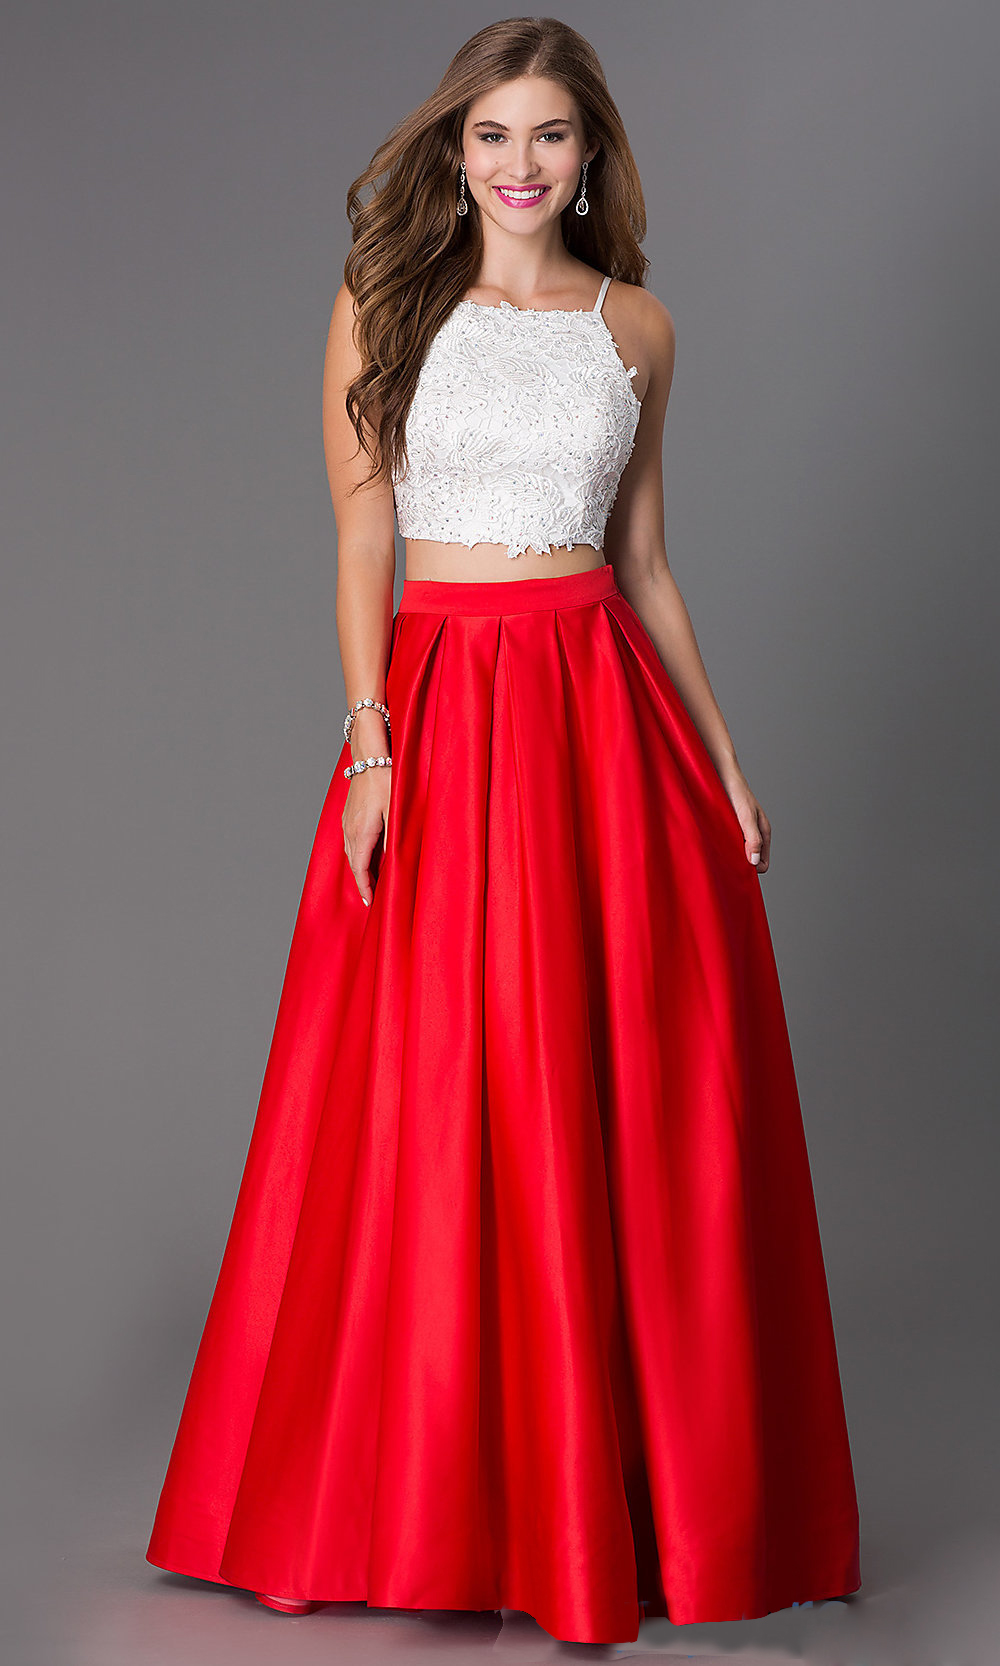 Sexy Red Long 2 Piece Prom Dresses 2016 O Neck Appliques Lace Prom